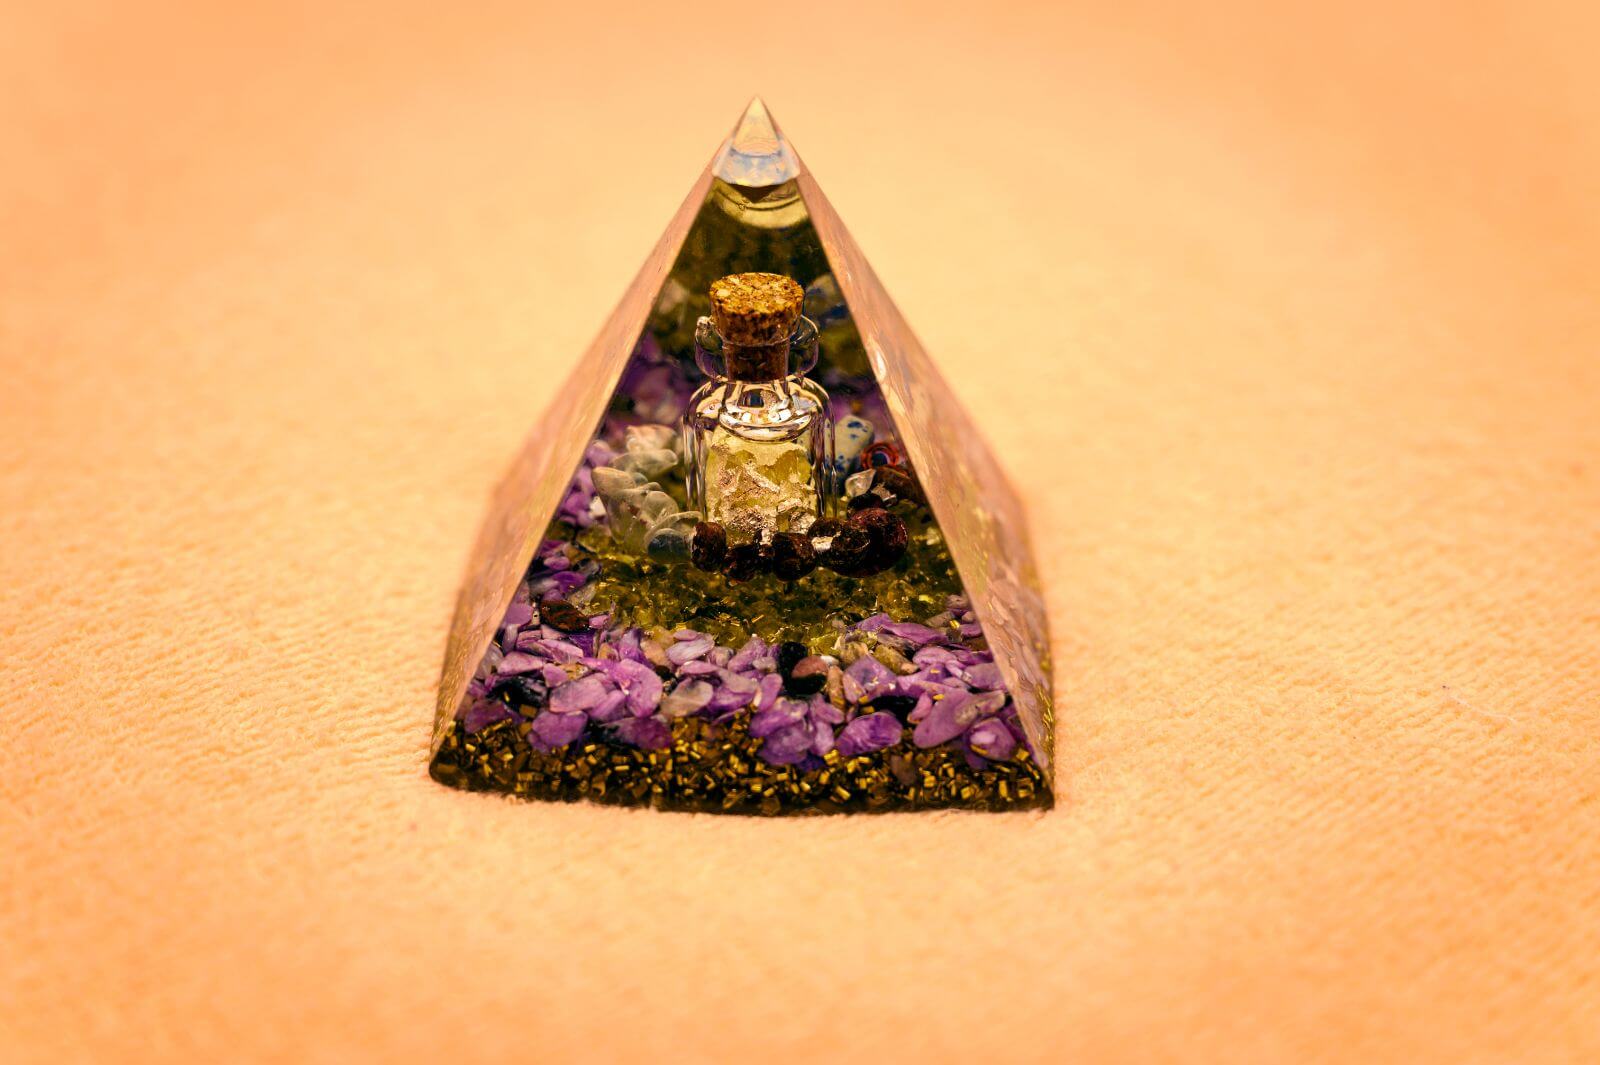 Orgone Energy: Creation, Benefits, And How It Works